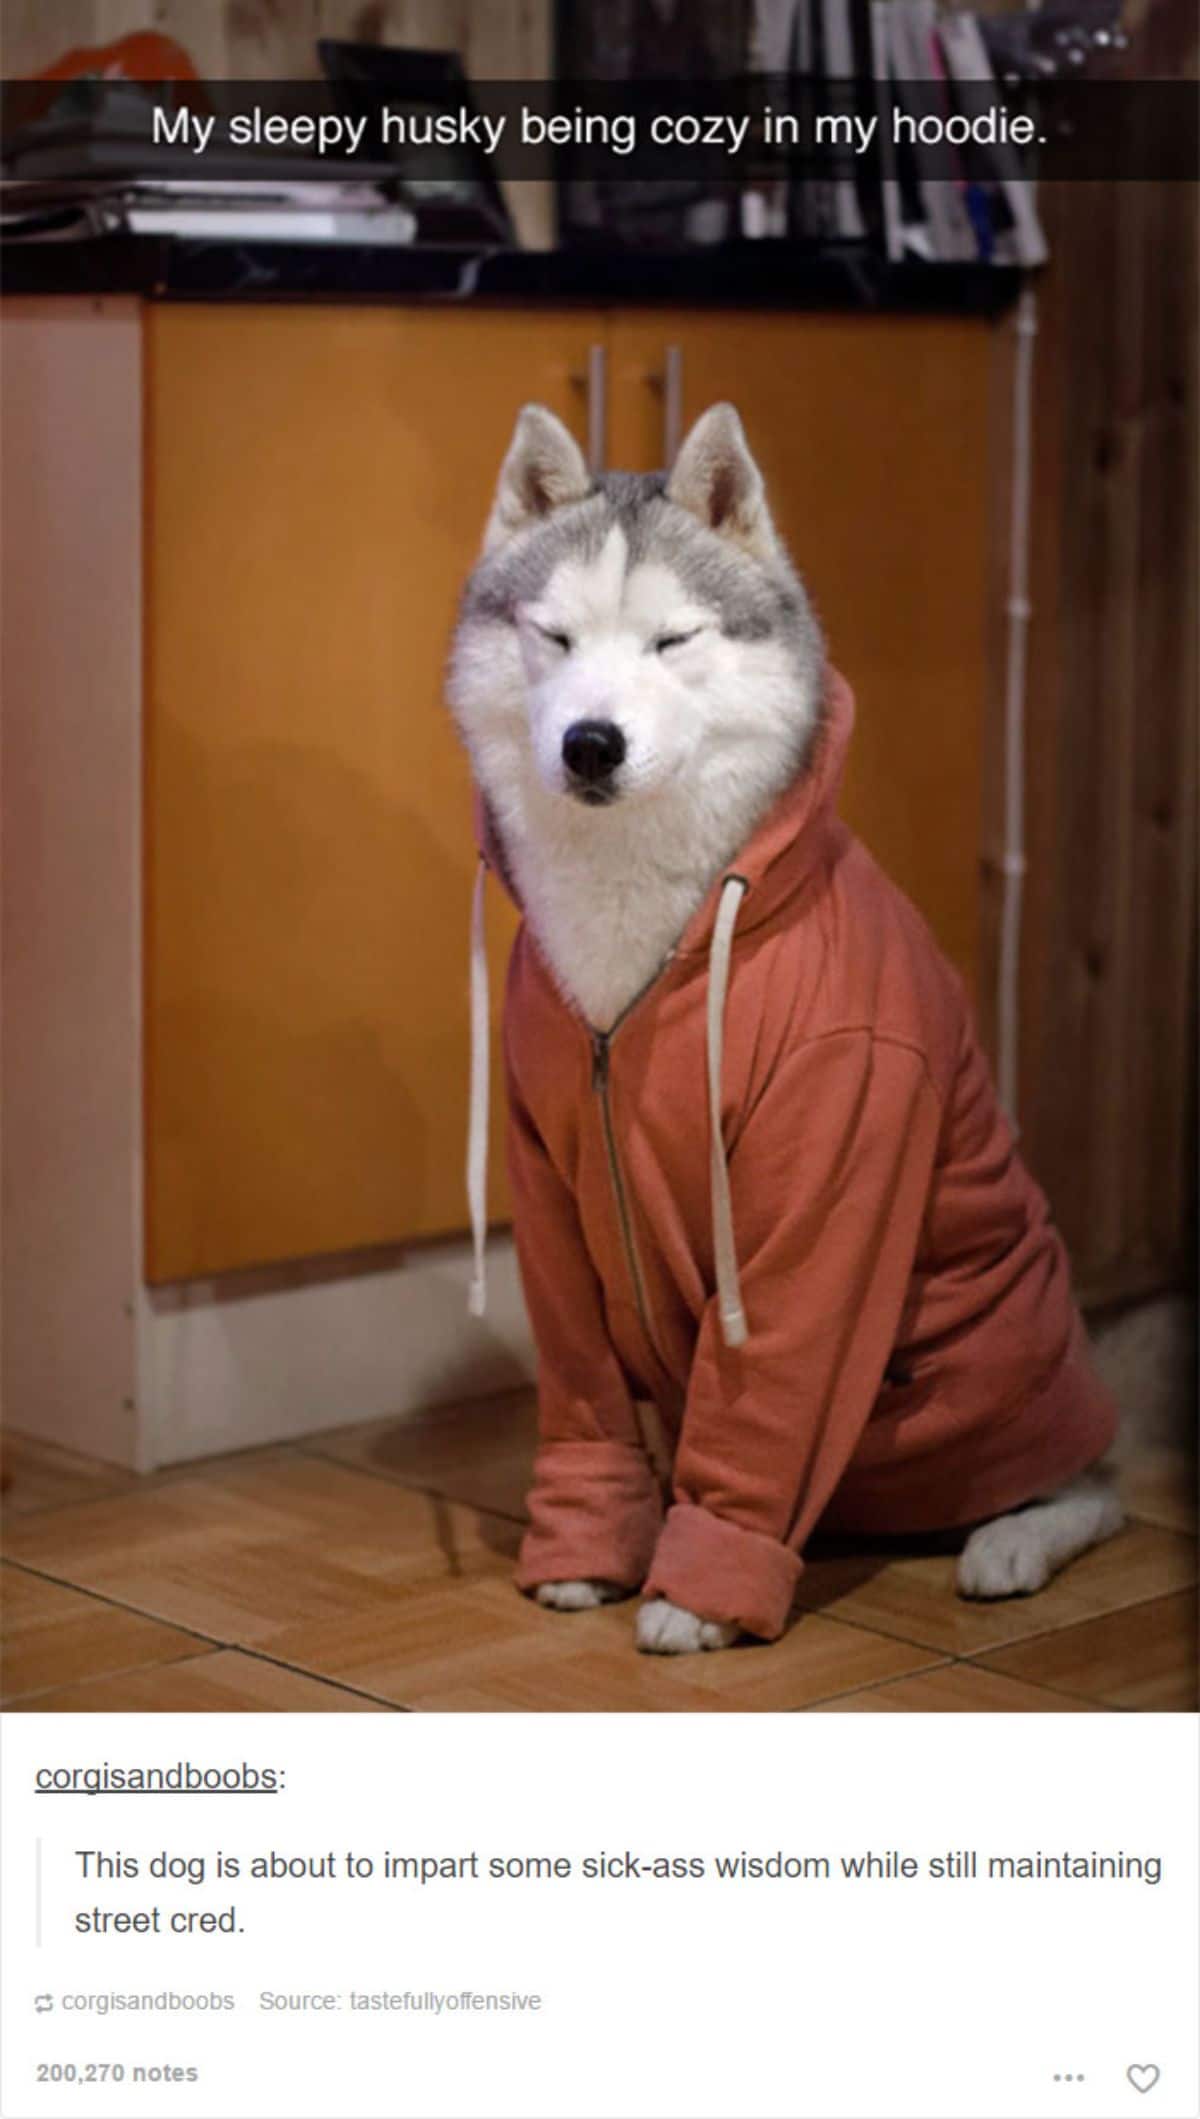 tumblr post of husky wearing brown hoodie saying he's cosy in it and the dog is about to impart some sick-ass wisdom while having street cred